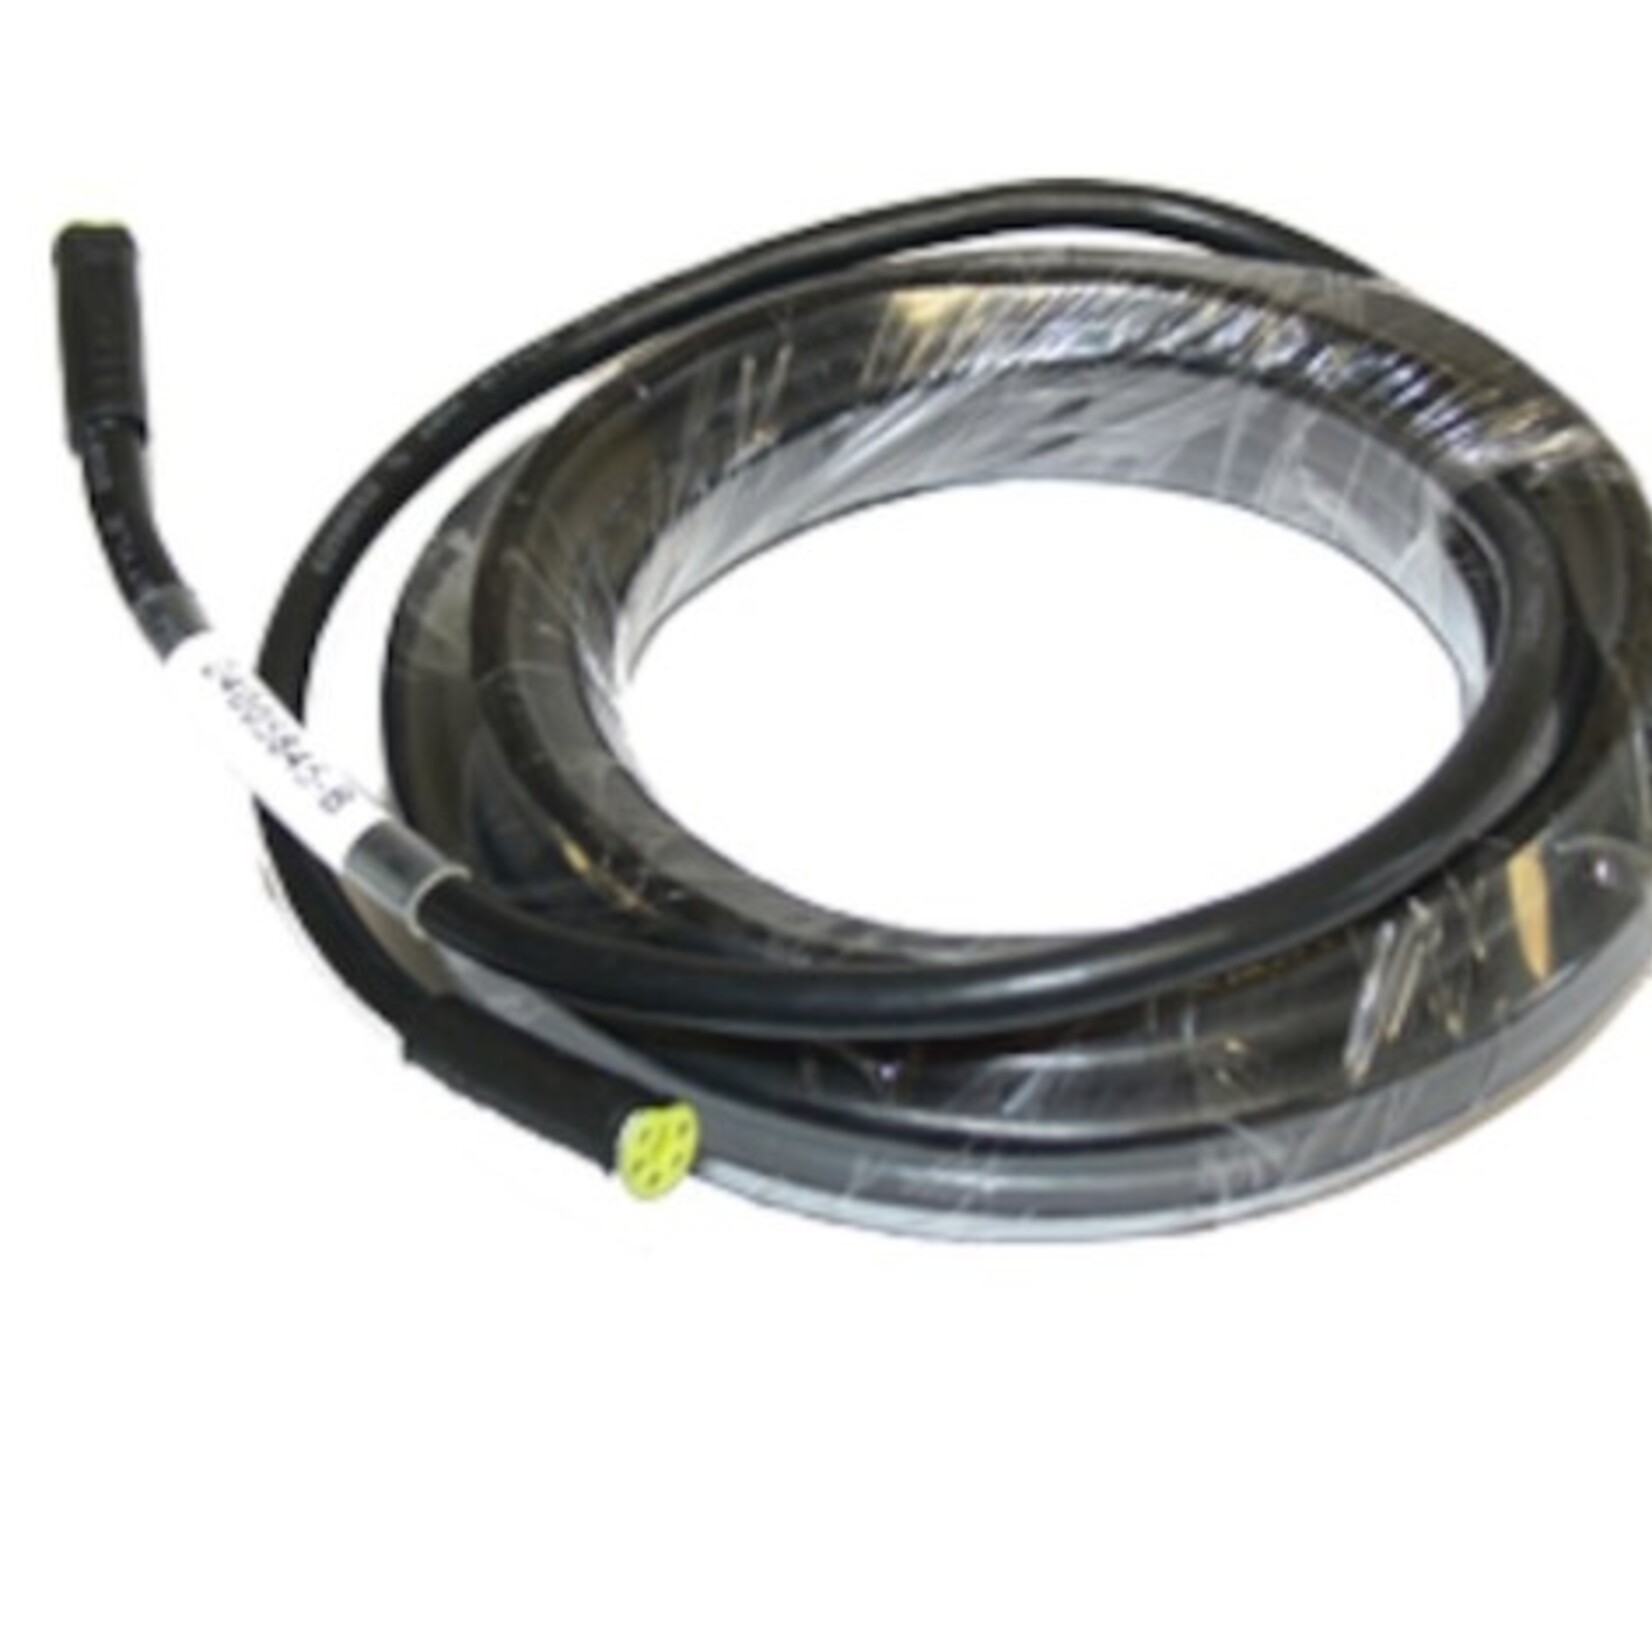 SimNet Cable -10 m (33 ft)